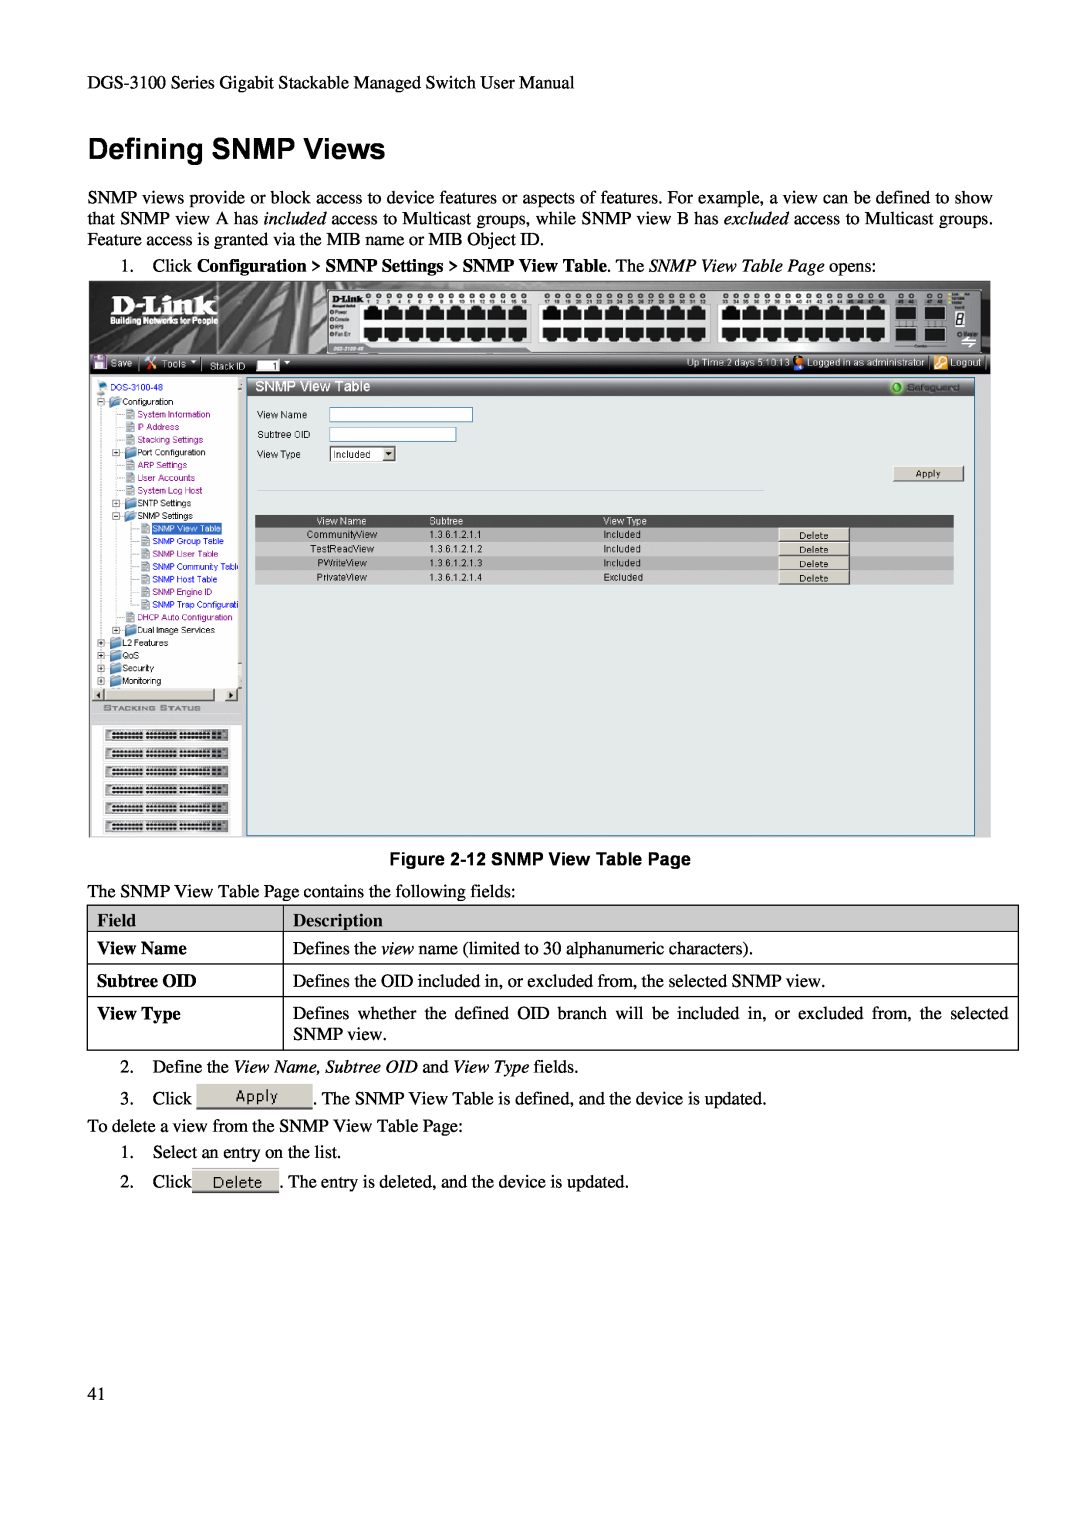 D-Link DGS-3100 Defining SNMP Views, 12 SNMP View Table Page, Field View Name Subtree OID View Type, Description 